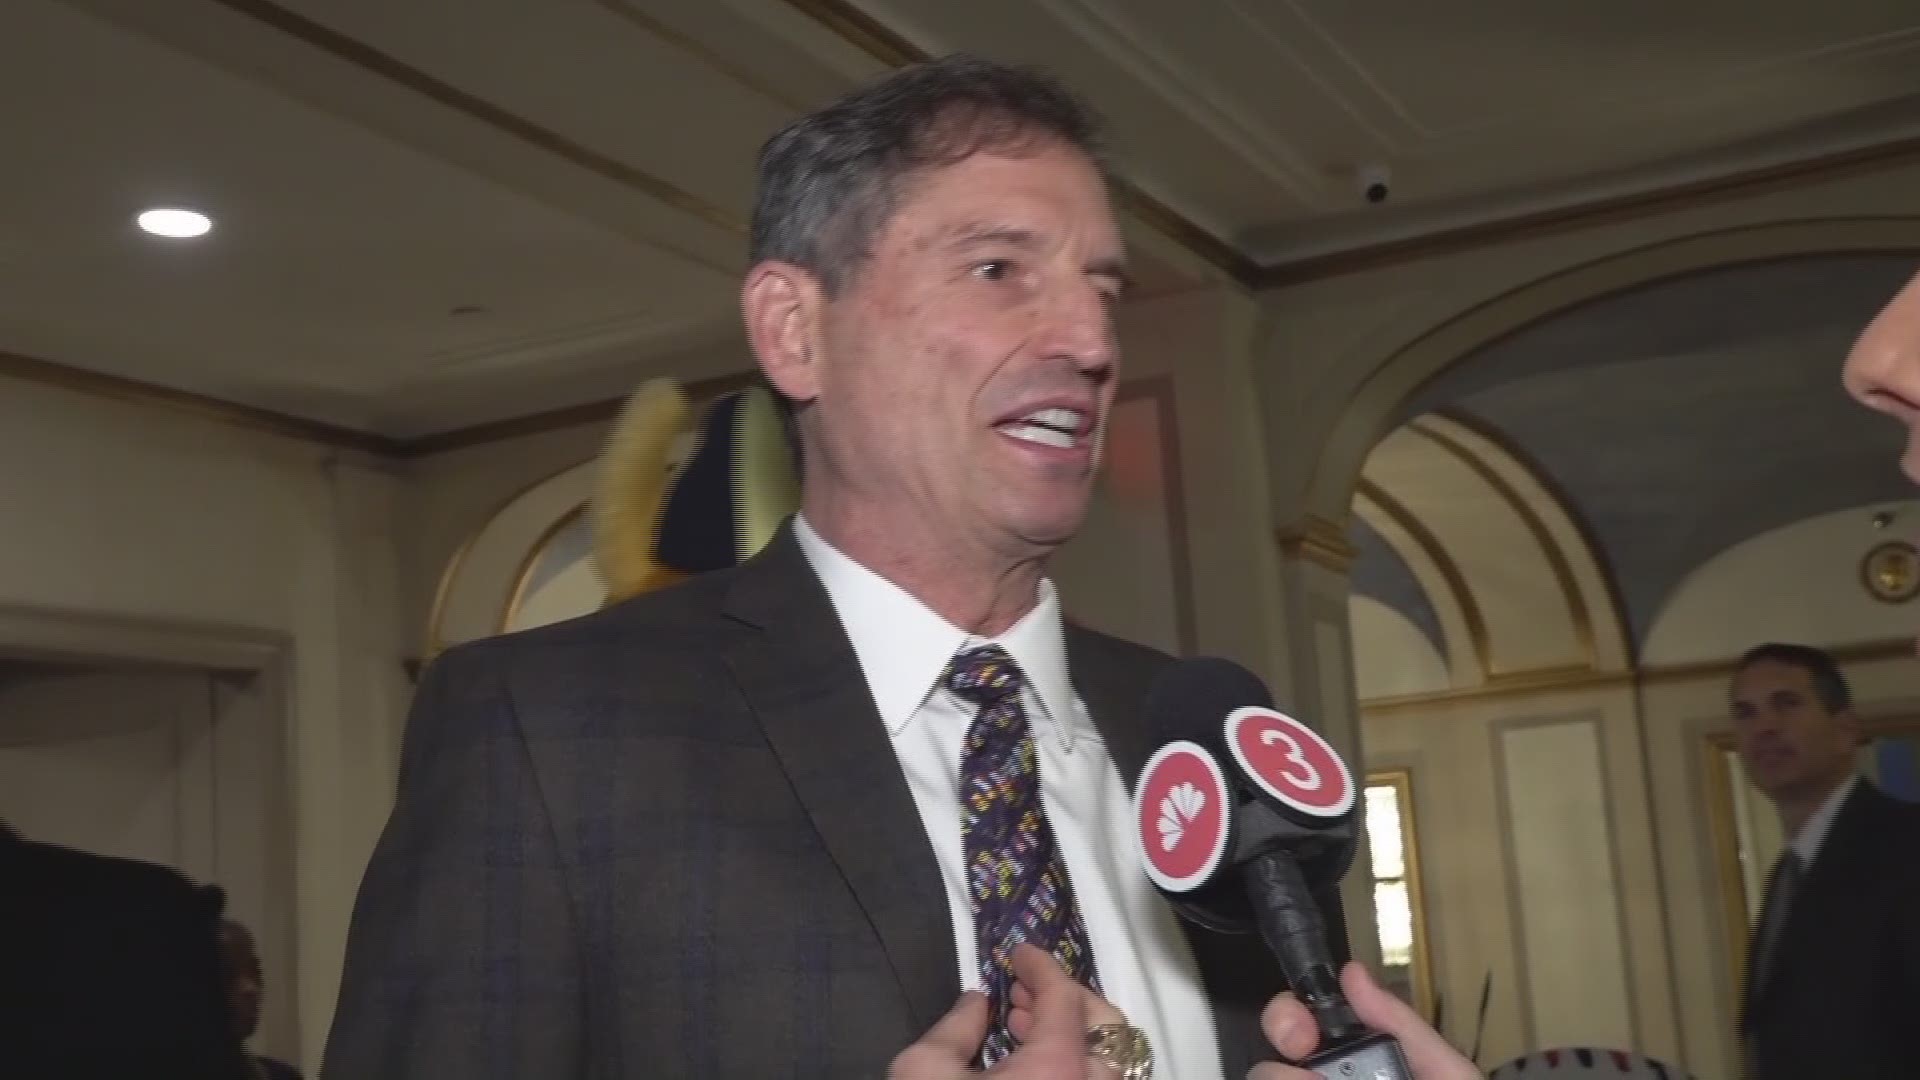 Legendary Browns quarterback Bernie Kosar made an appearance at Wednesday's Greater Cleveland Sports Awards. The event is always special for him.